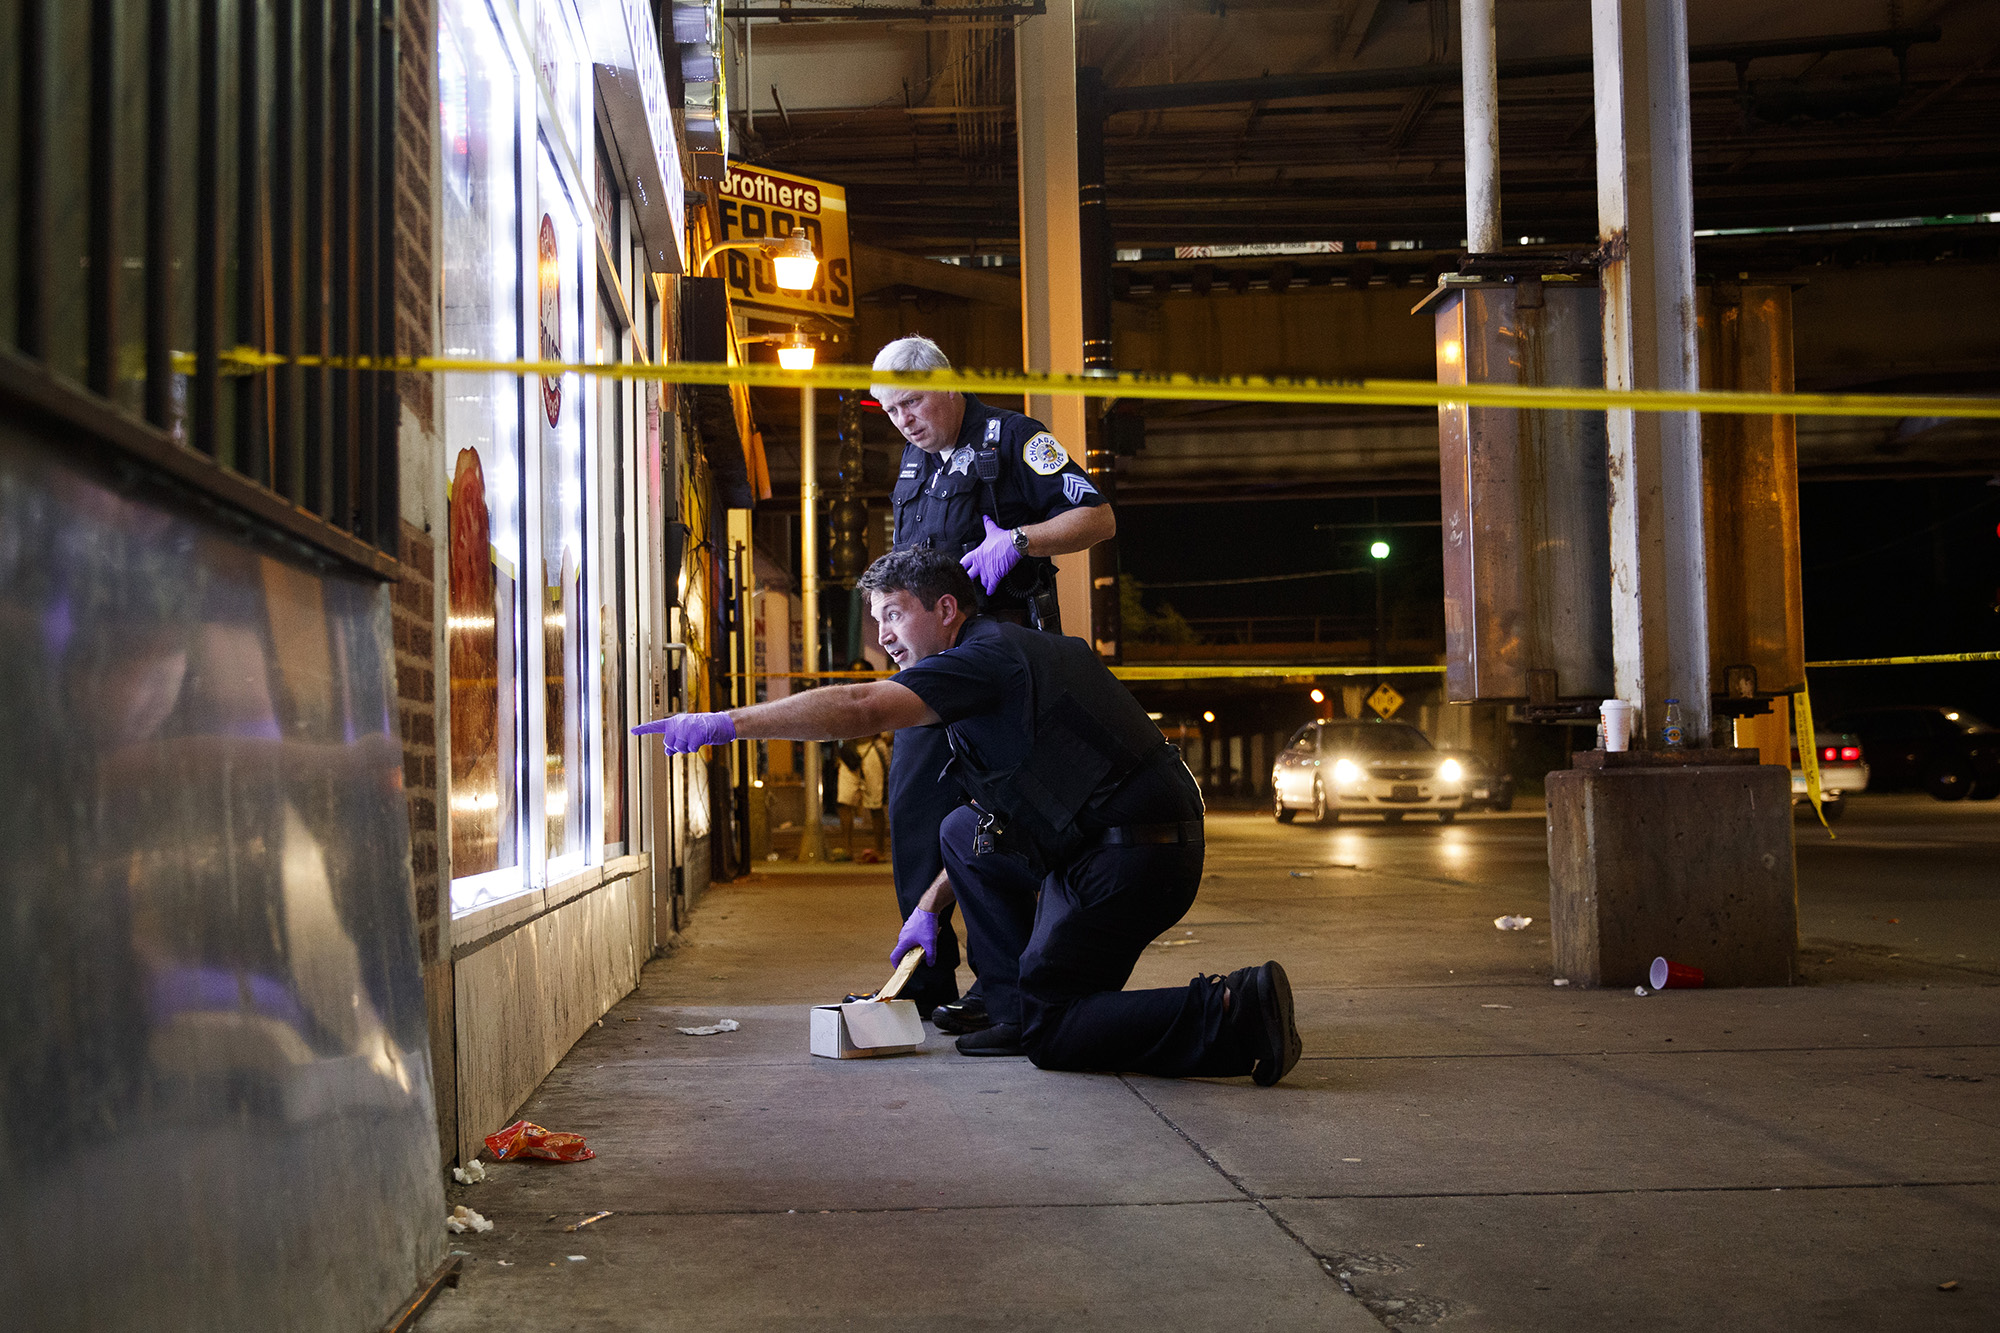 Police work a scene where two people were shot, one fatally, near the intersection of North Laramie Avenue and West Lake Street in Chicago on July 5, 2019. (Armando L. Sanchez—Chicago Tribune/Getty Images)